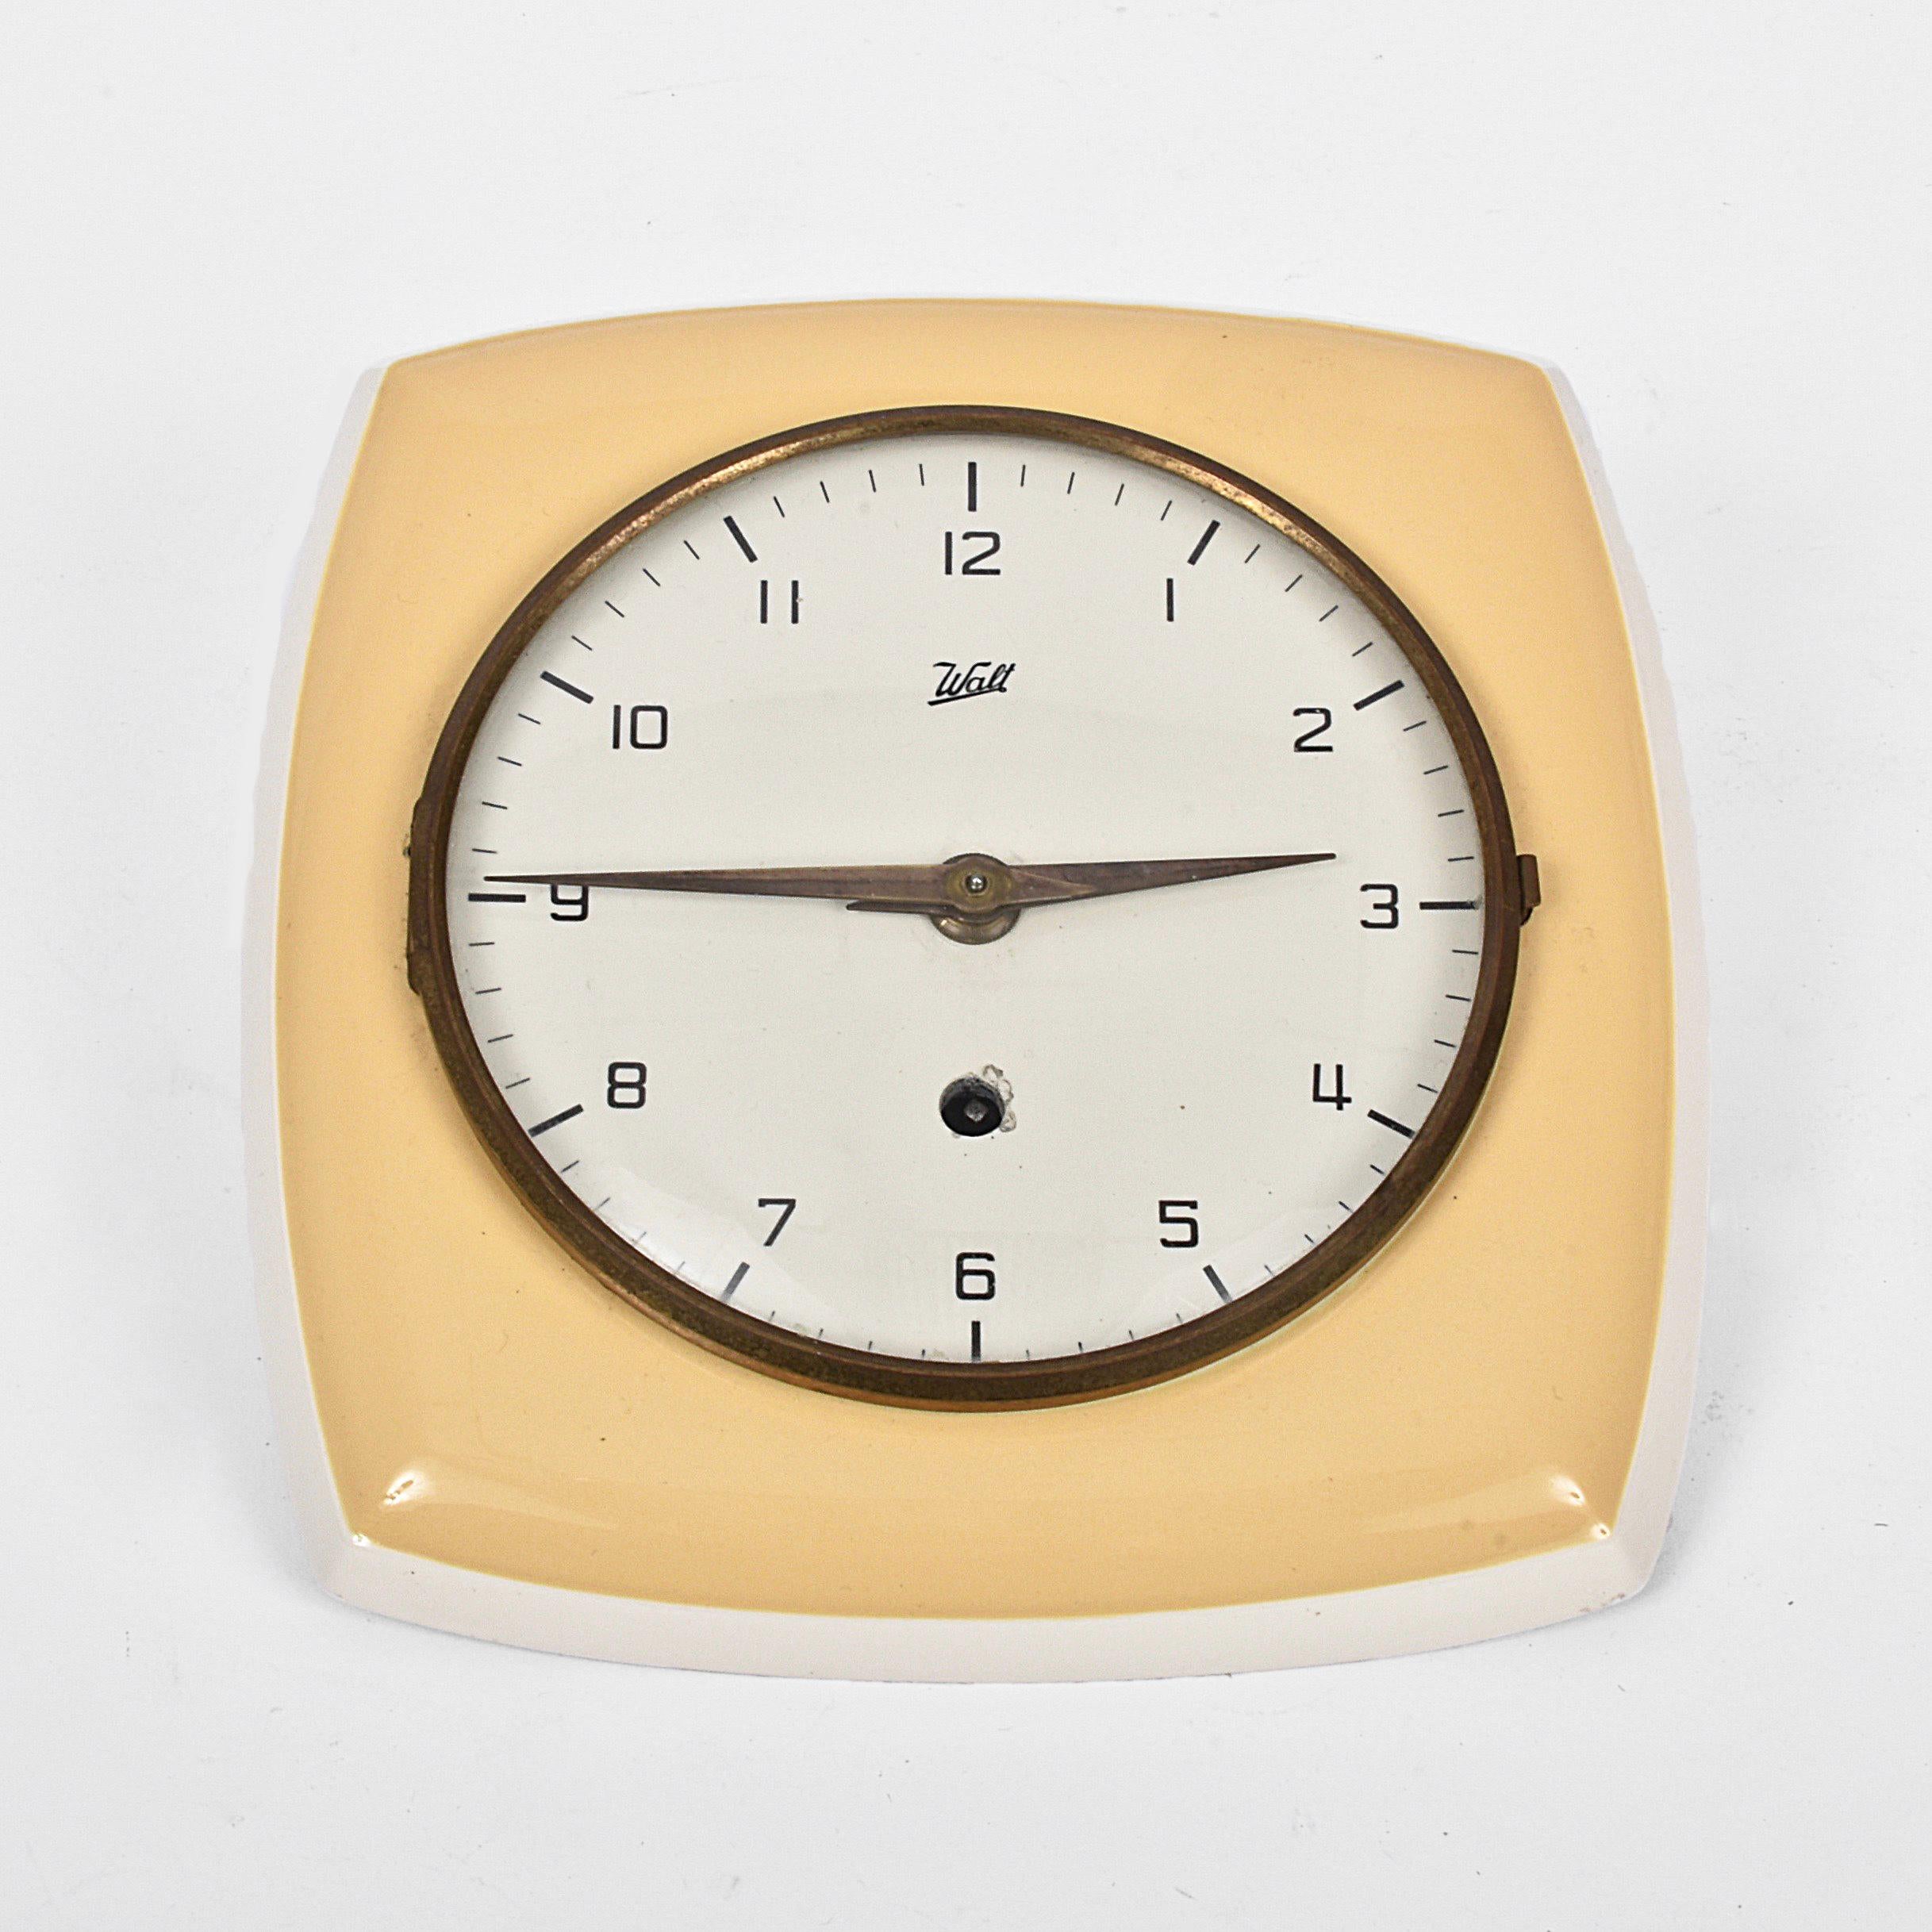 Ceramic wall clock, by Walt. Load with key, original included.
working.